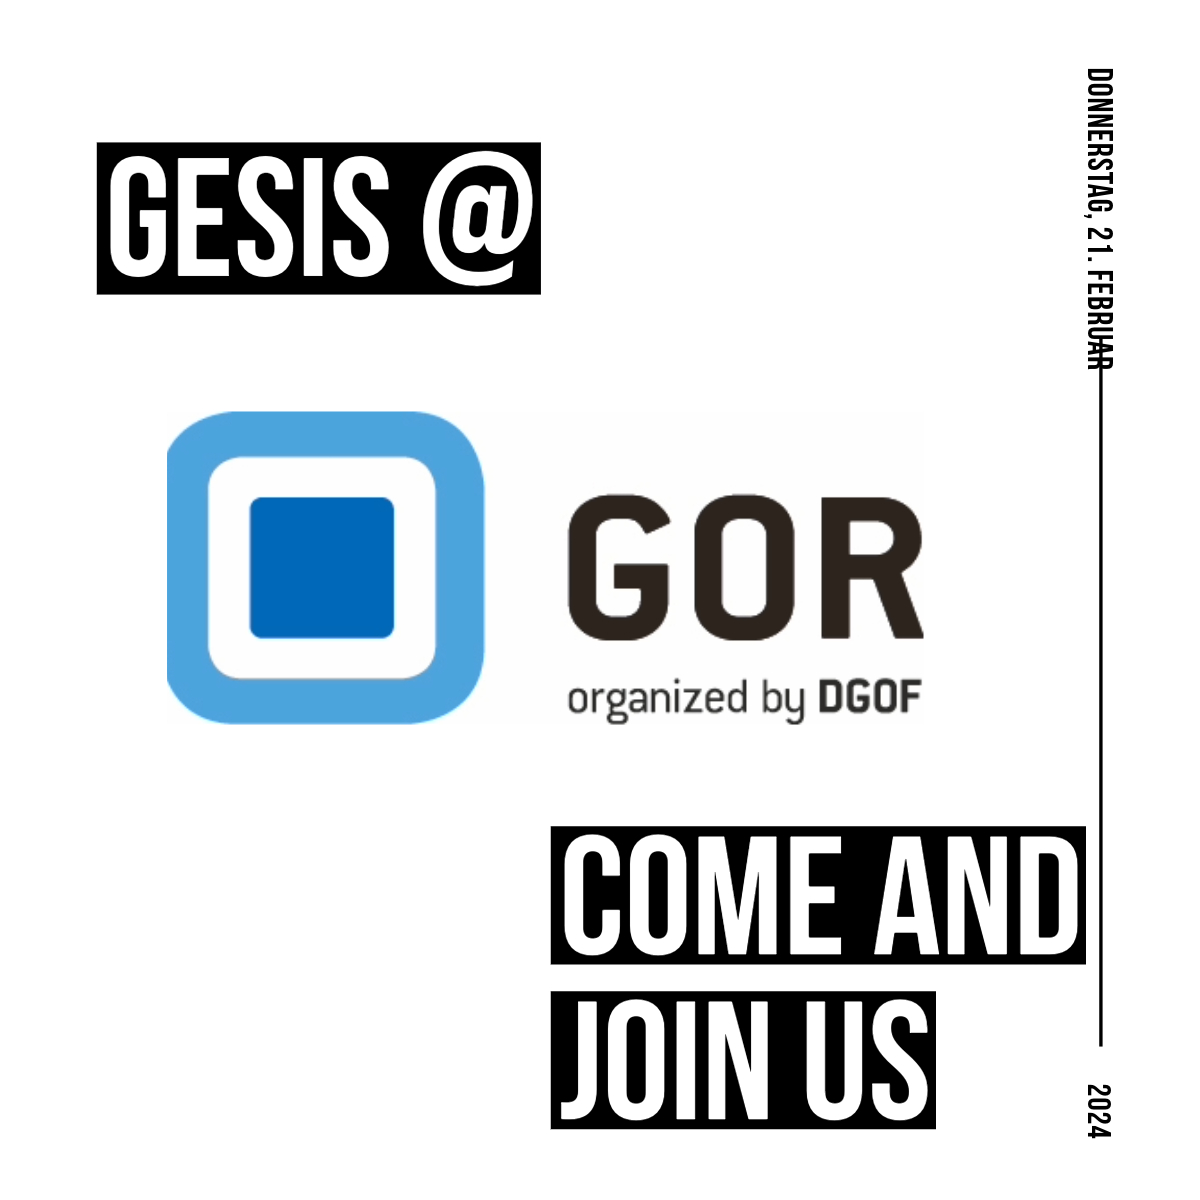 #webtracking #gor24 Are you interested in web tracking studies? Check out the talk 'Willingness to participate in passive data collection studies' by our colleagues at GESIS today from 5:00pm - 6:00pm: tinyurl.com/28avafxr